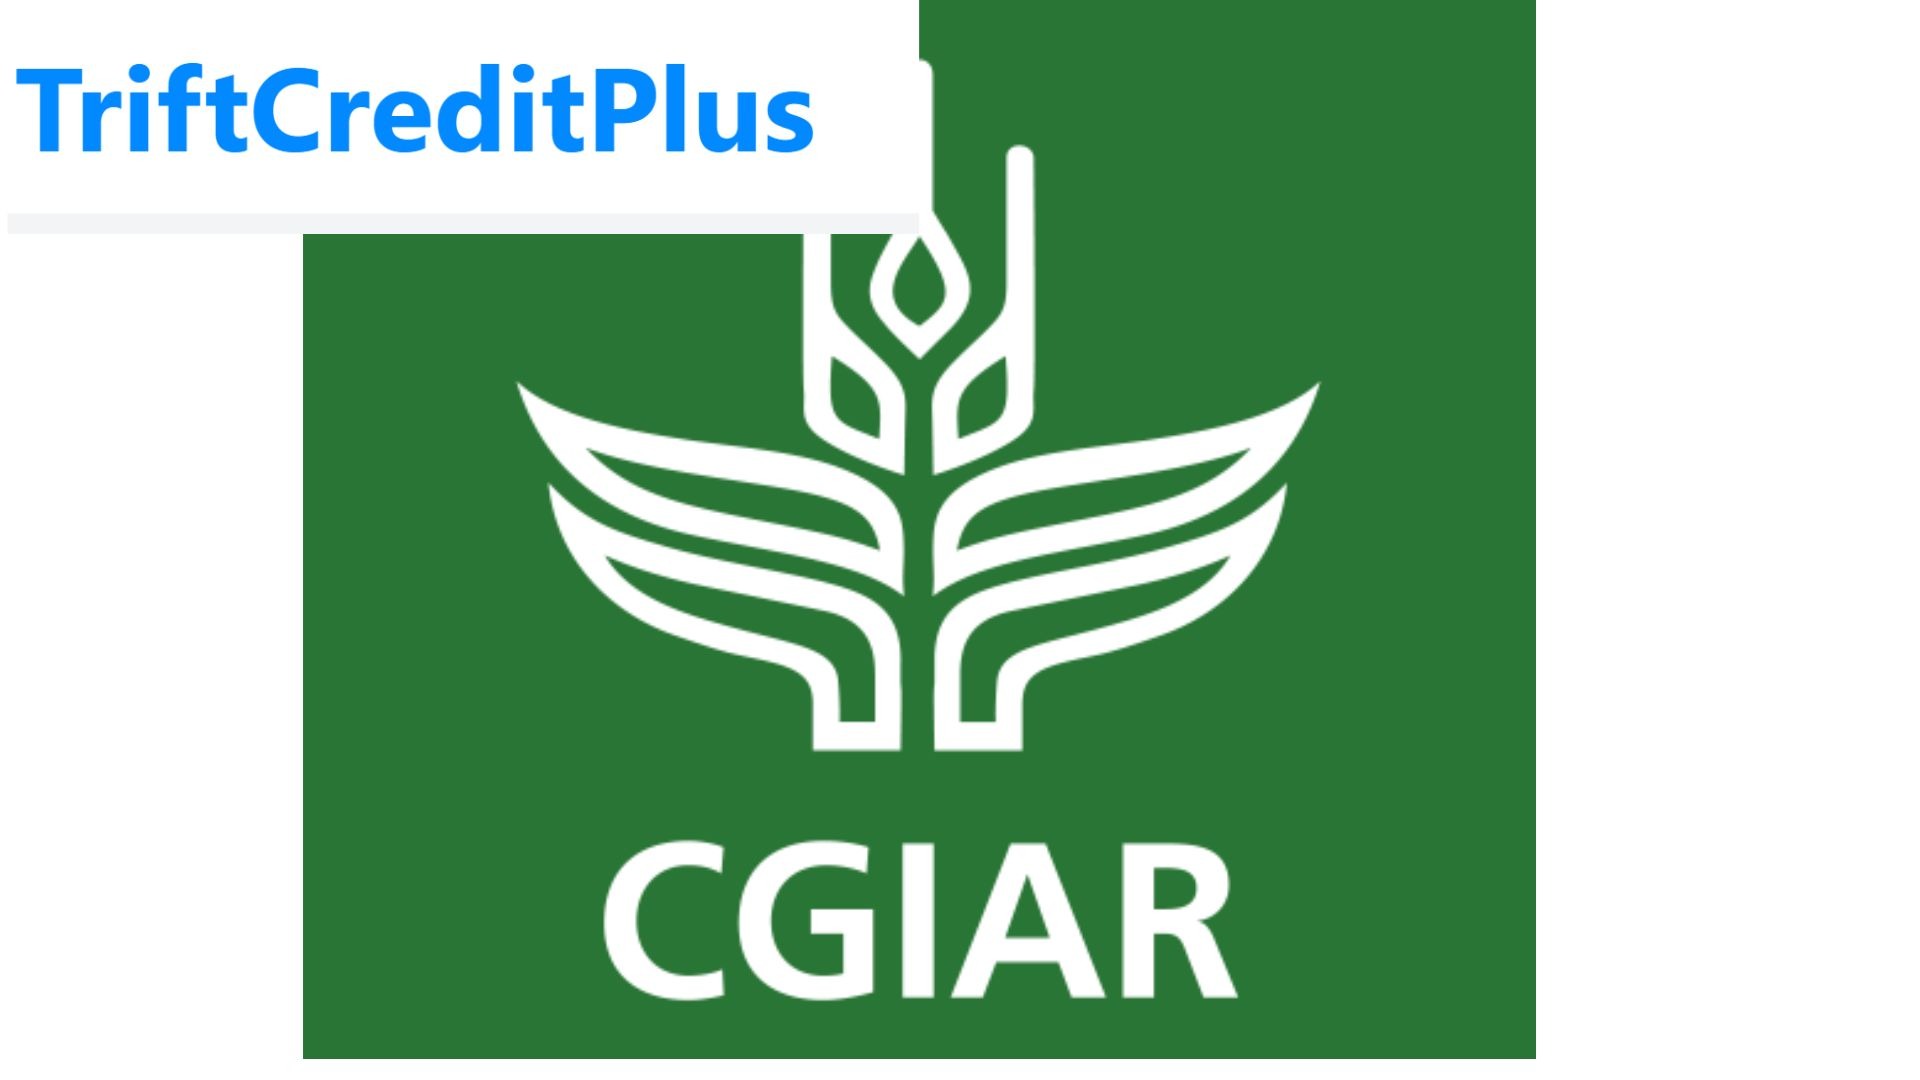 CGIAR/WFP Stability-and-Peace Accelerator Program 2024 ($30,000 equity-free grant)